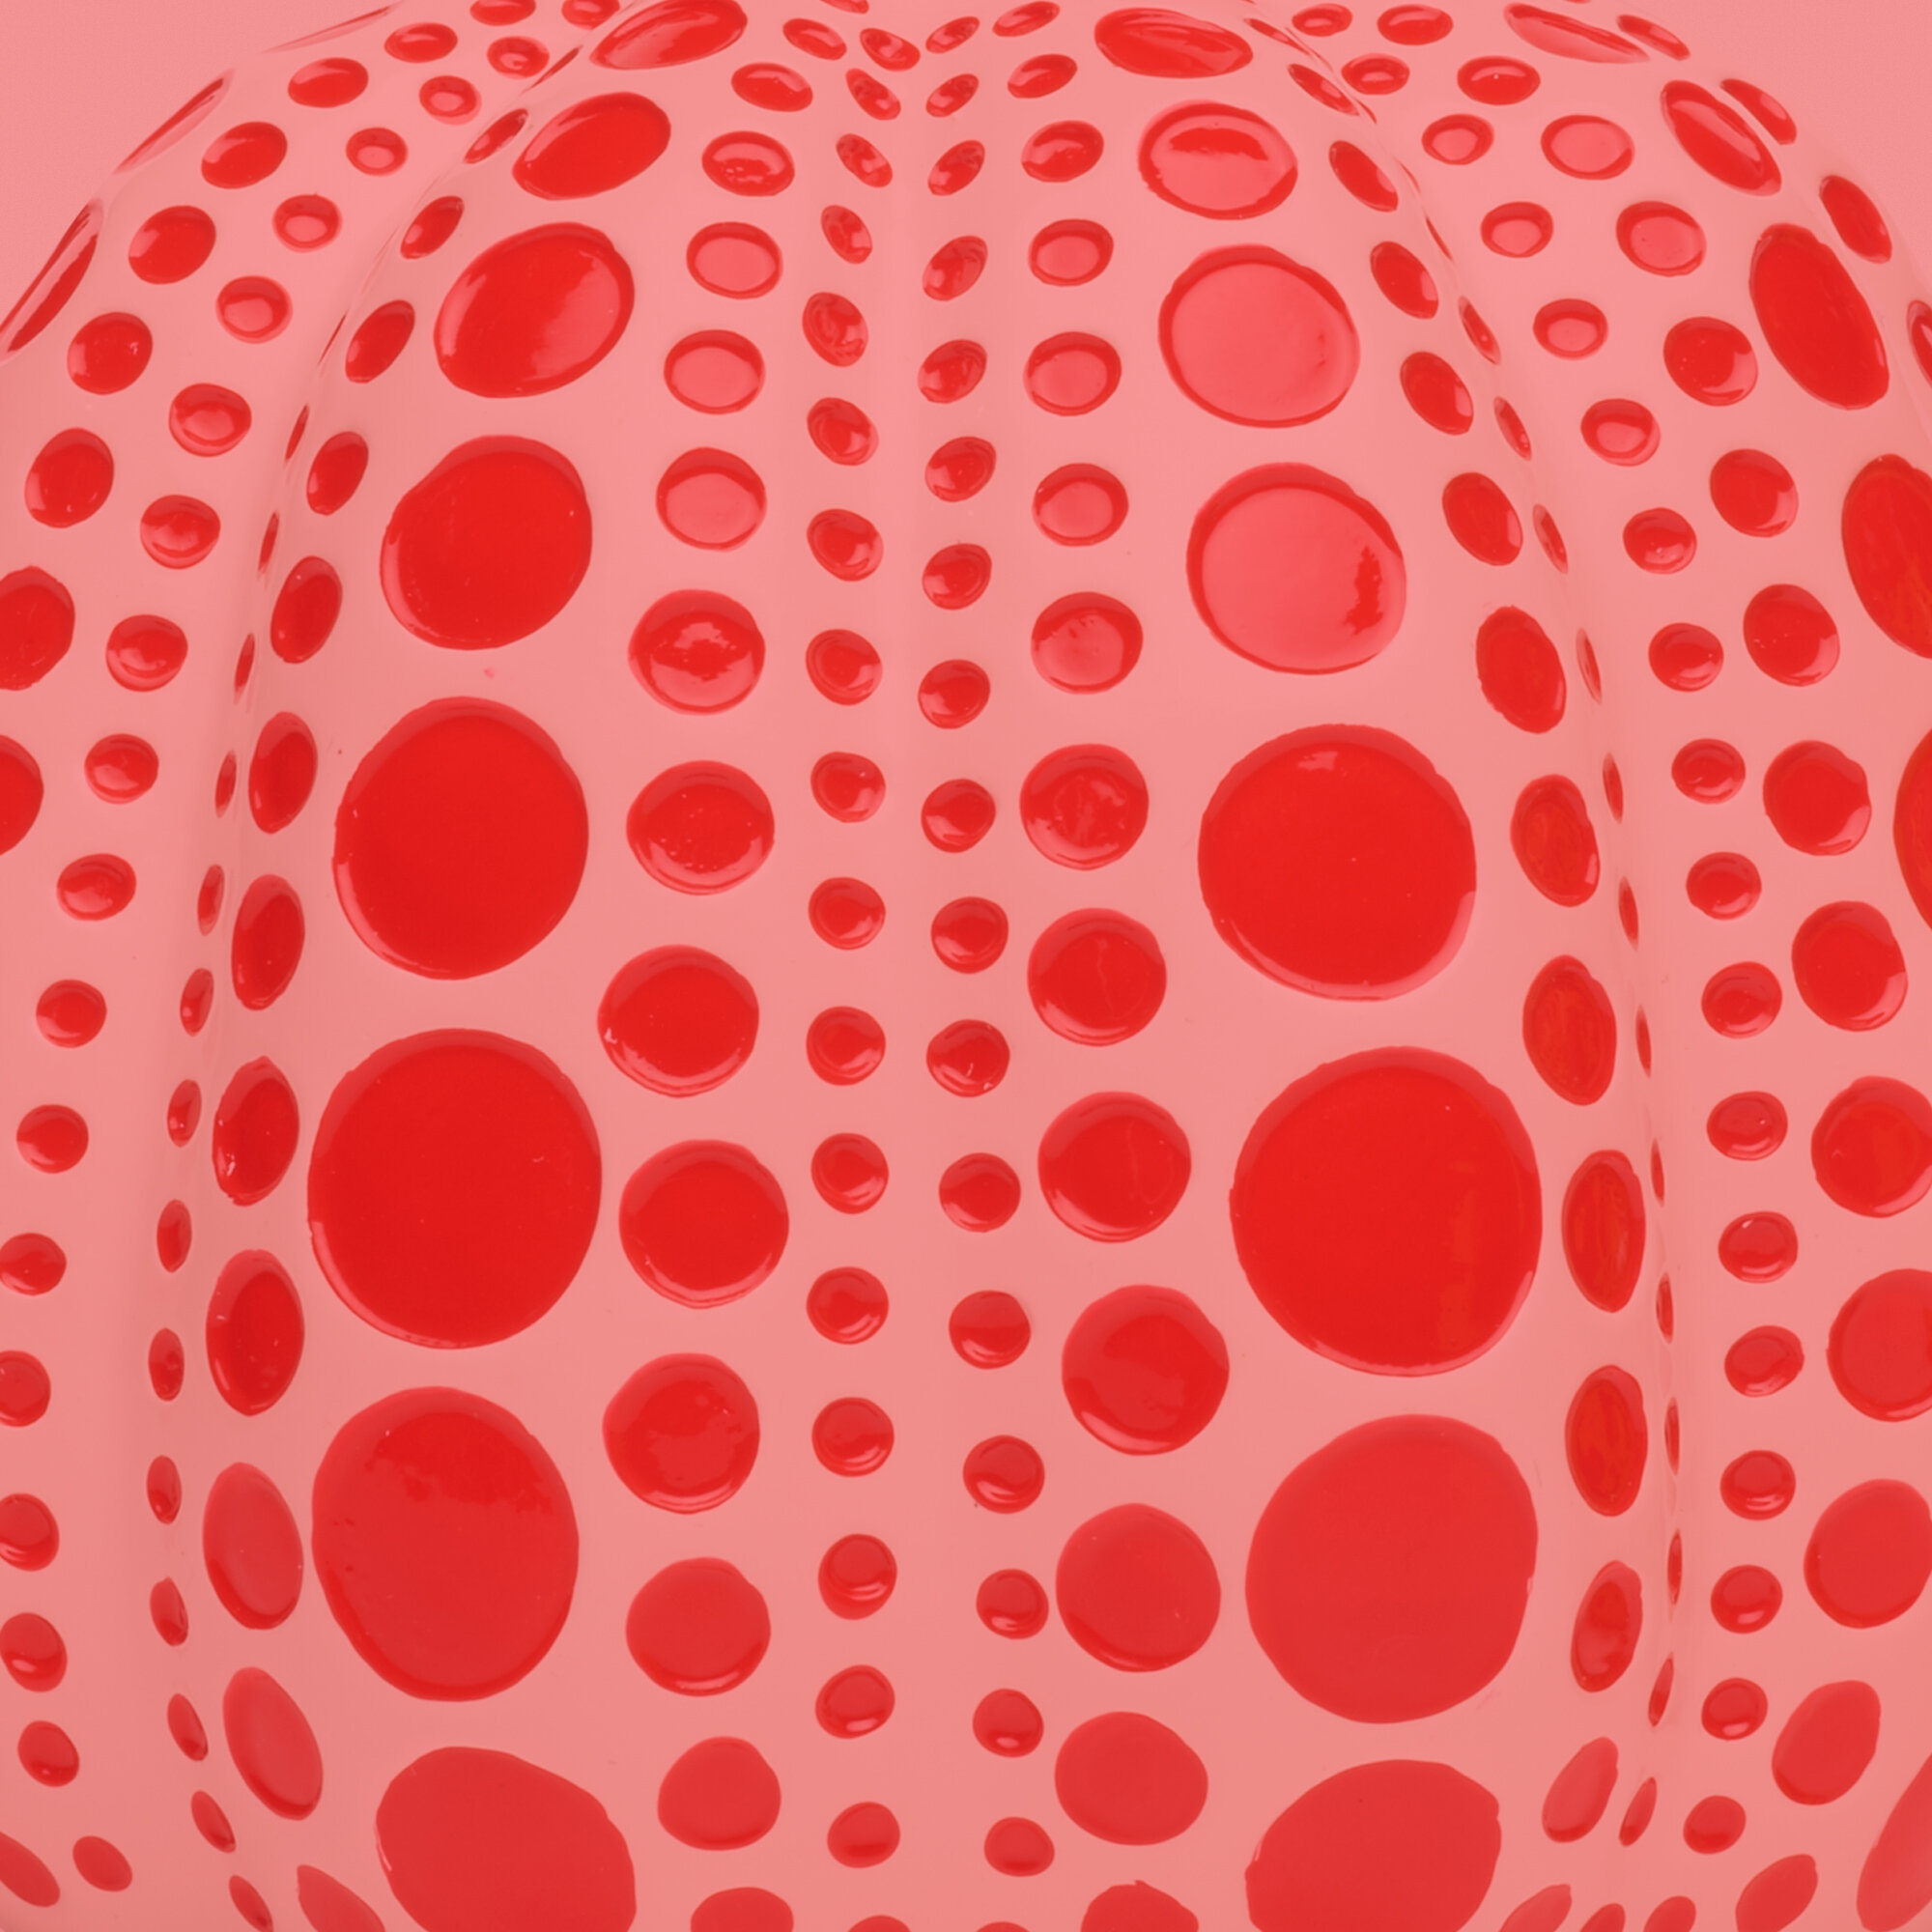 One of Yayoi Kusama's Founding Works Revived by the Louis Vuitton  Foundation / Pen ペン